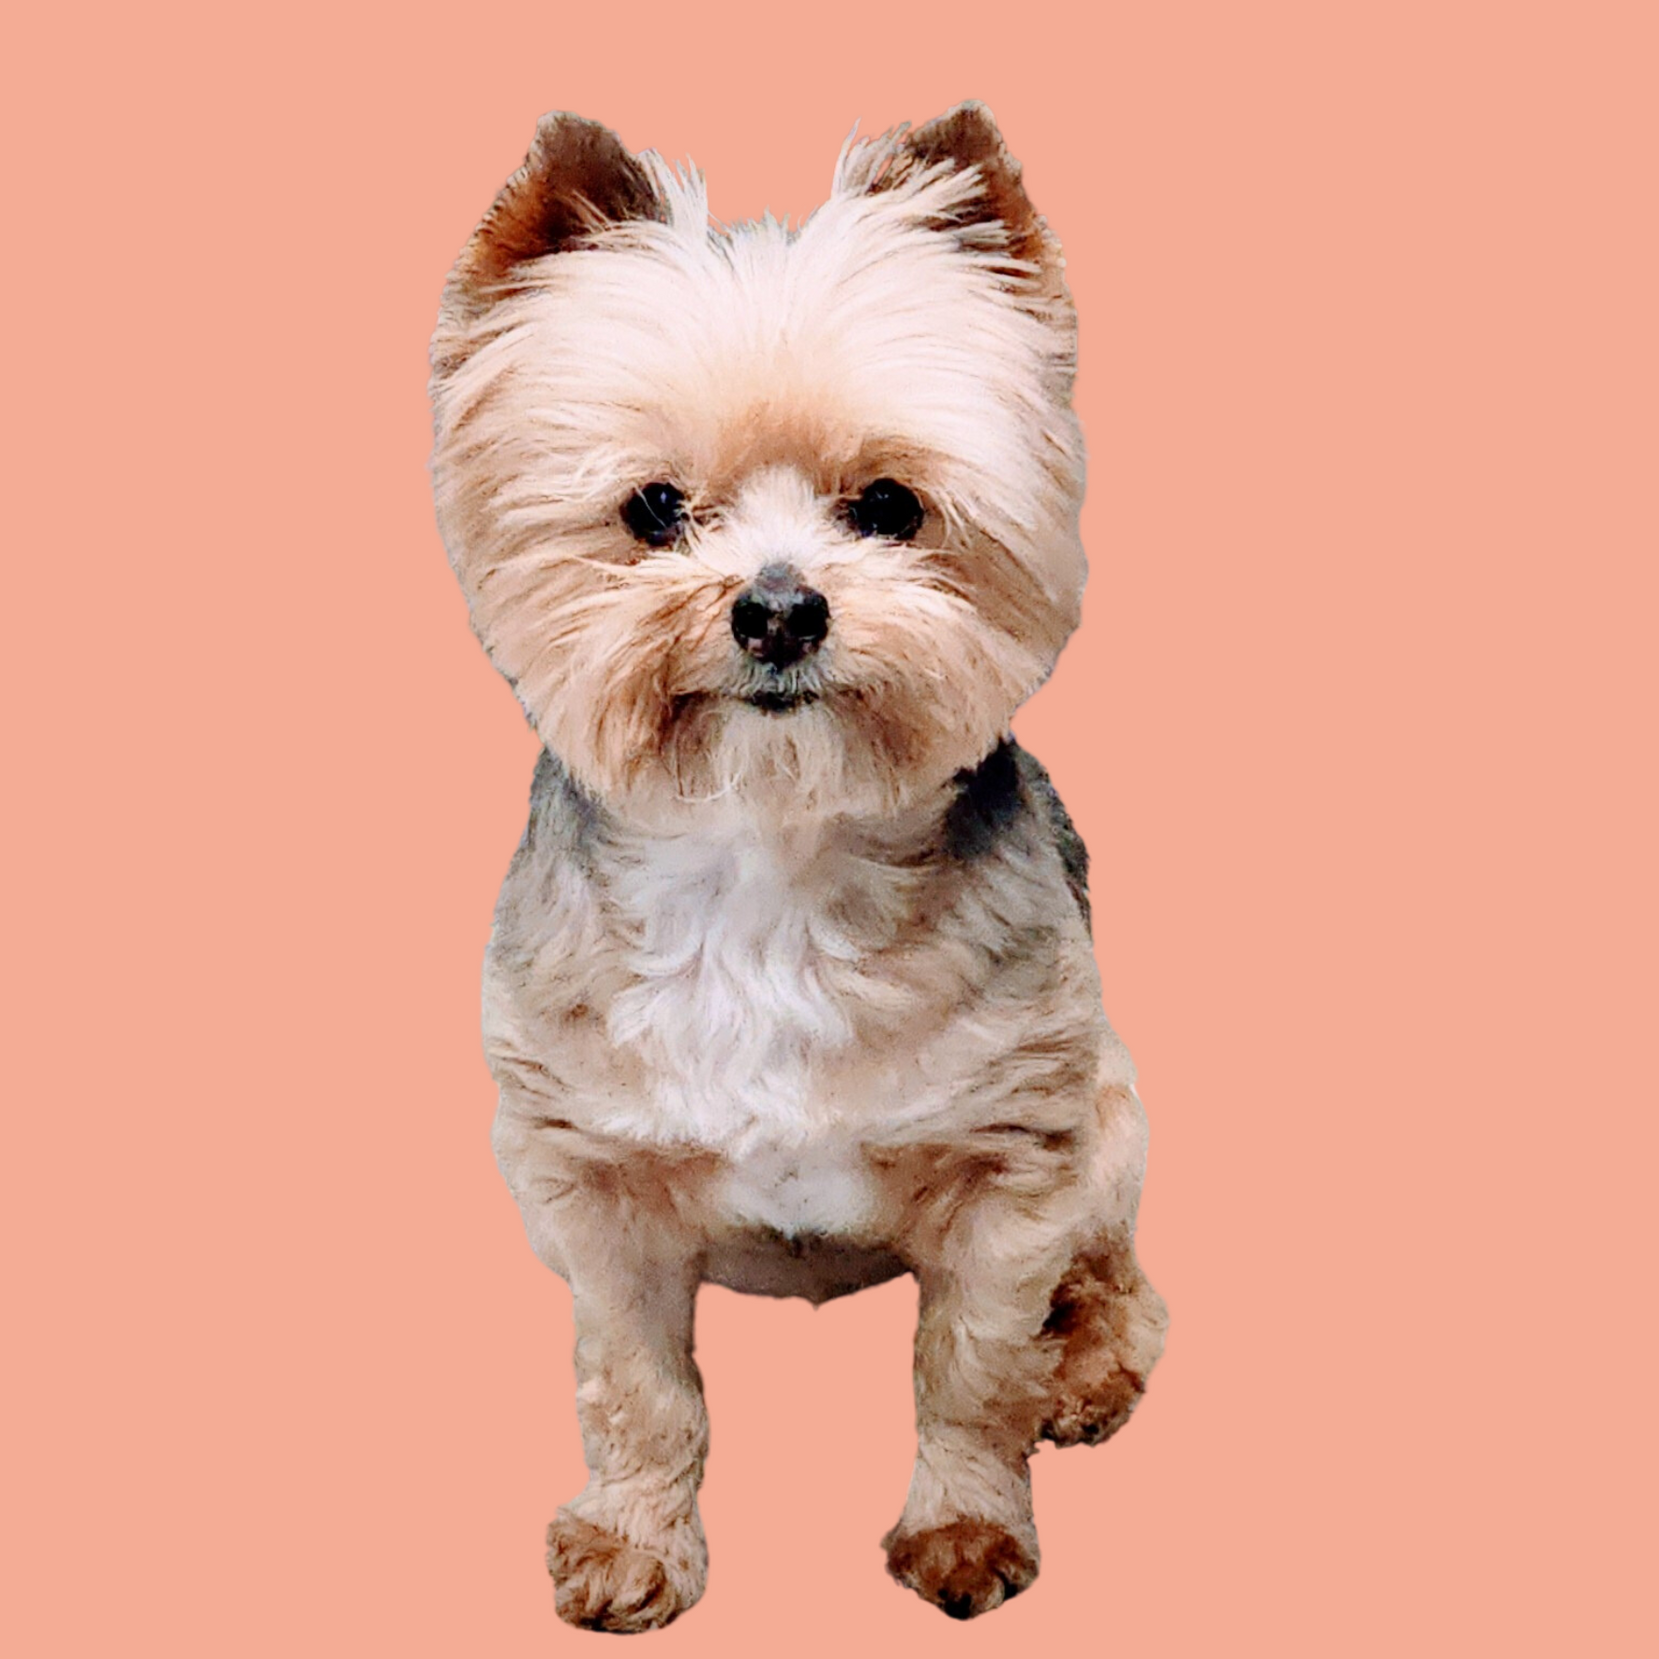 a small brown and white dog is standing on a pink background and looking at the camera .